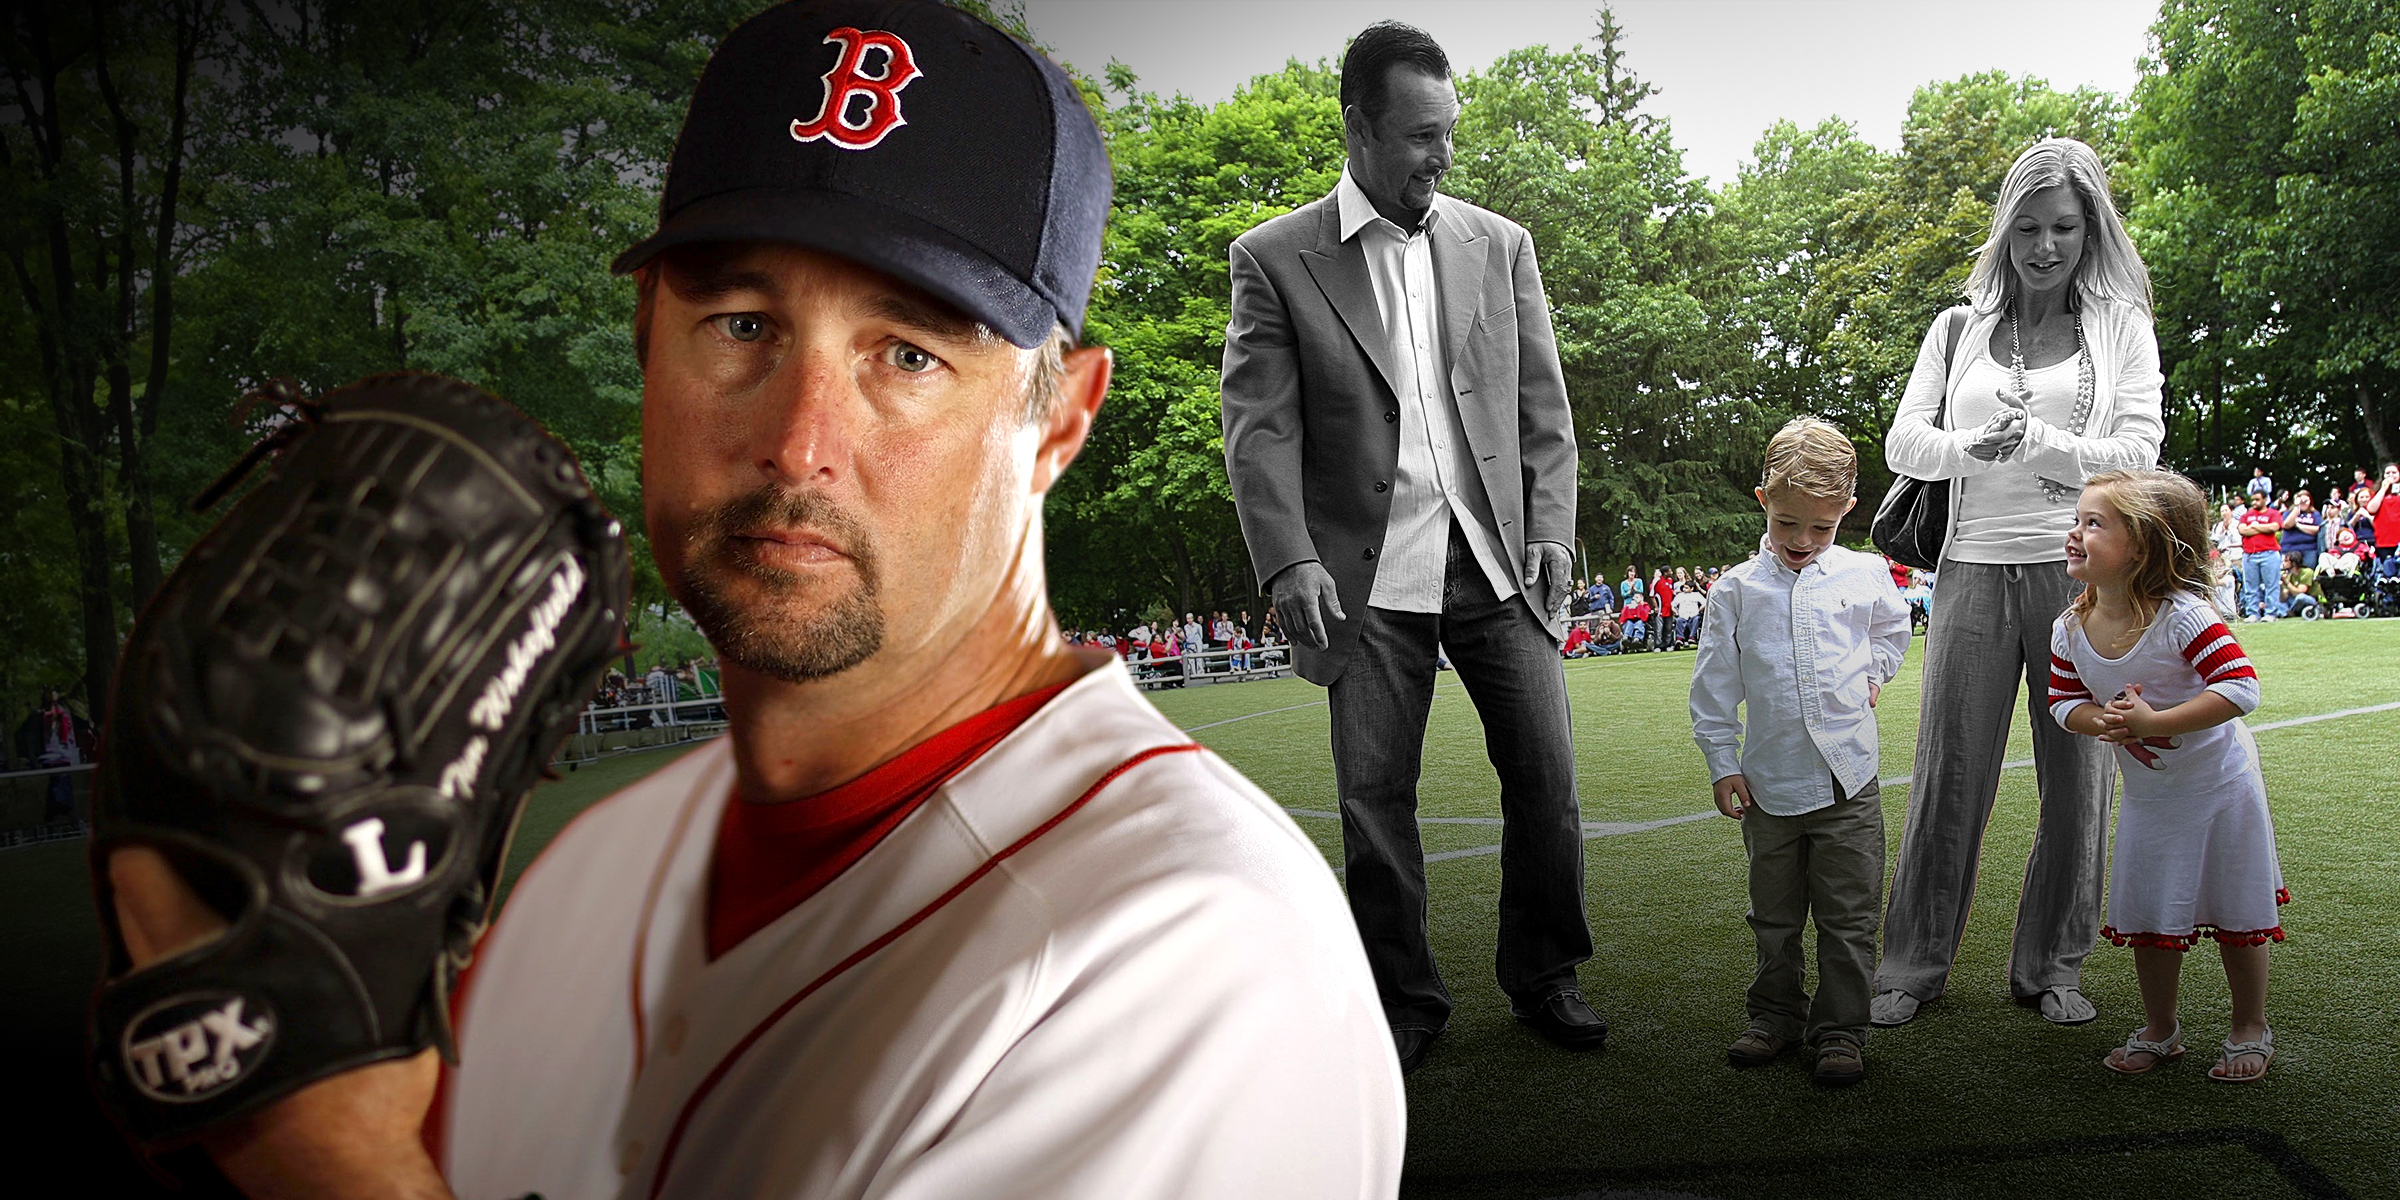 Tim Wakefield | Tim Wakefield, Stacy Wakefield, and their kids | Source: Getty Images